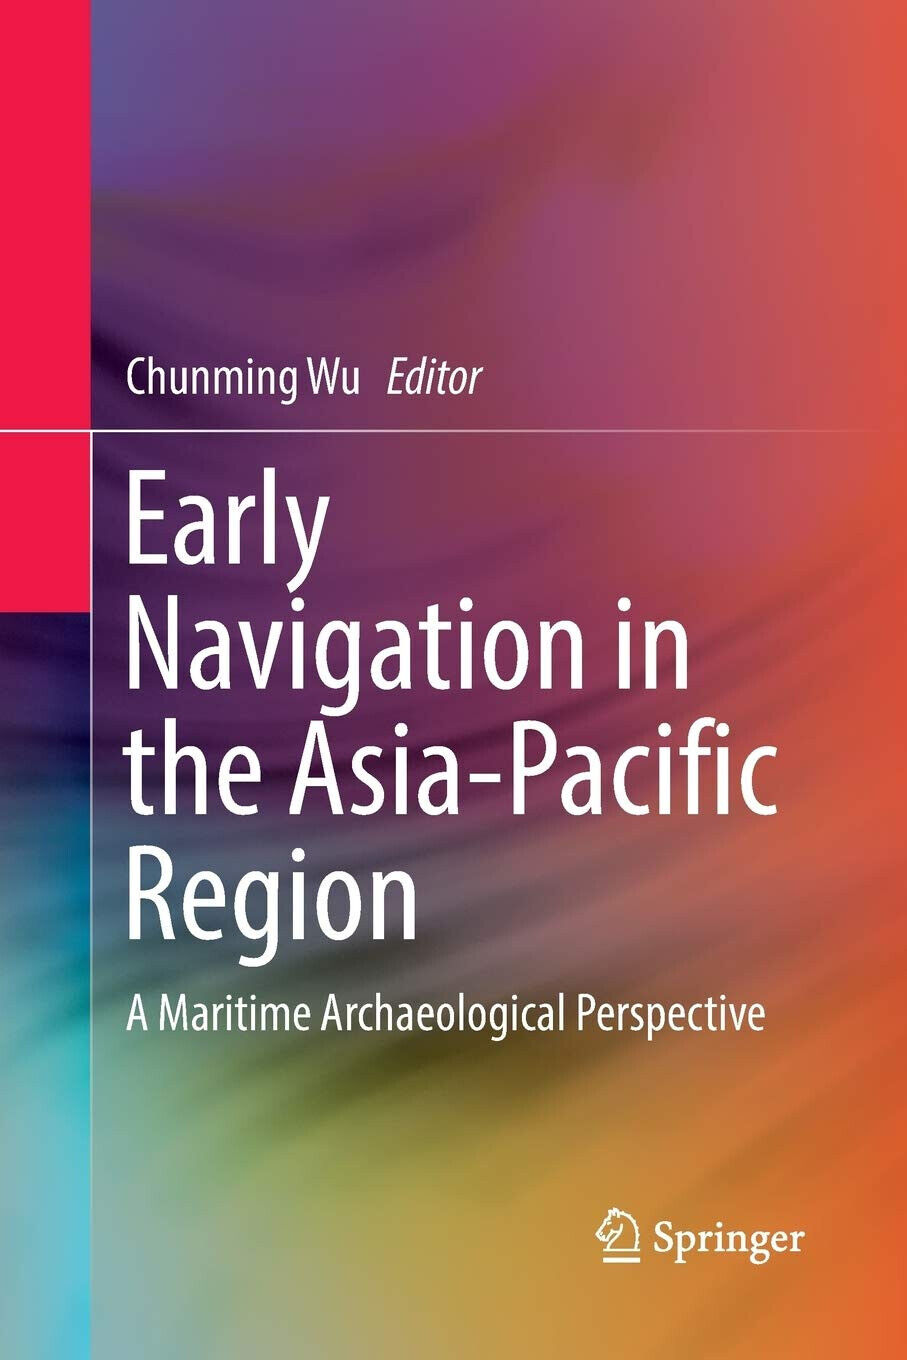 Early Navigation in the Asia-Pacific Region - Chunming Wu - Springer, 2018 libro usato